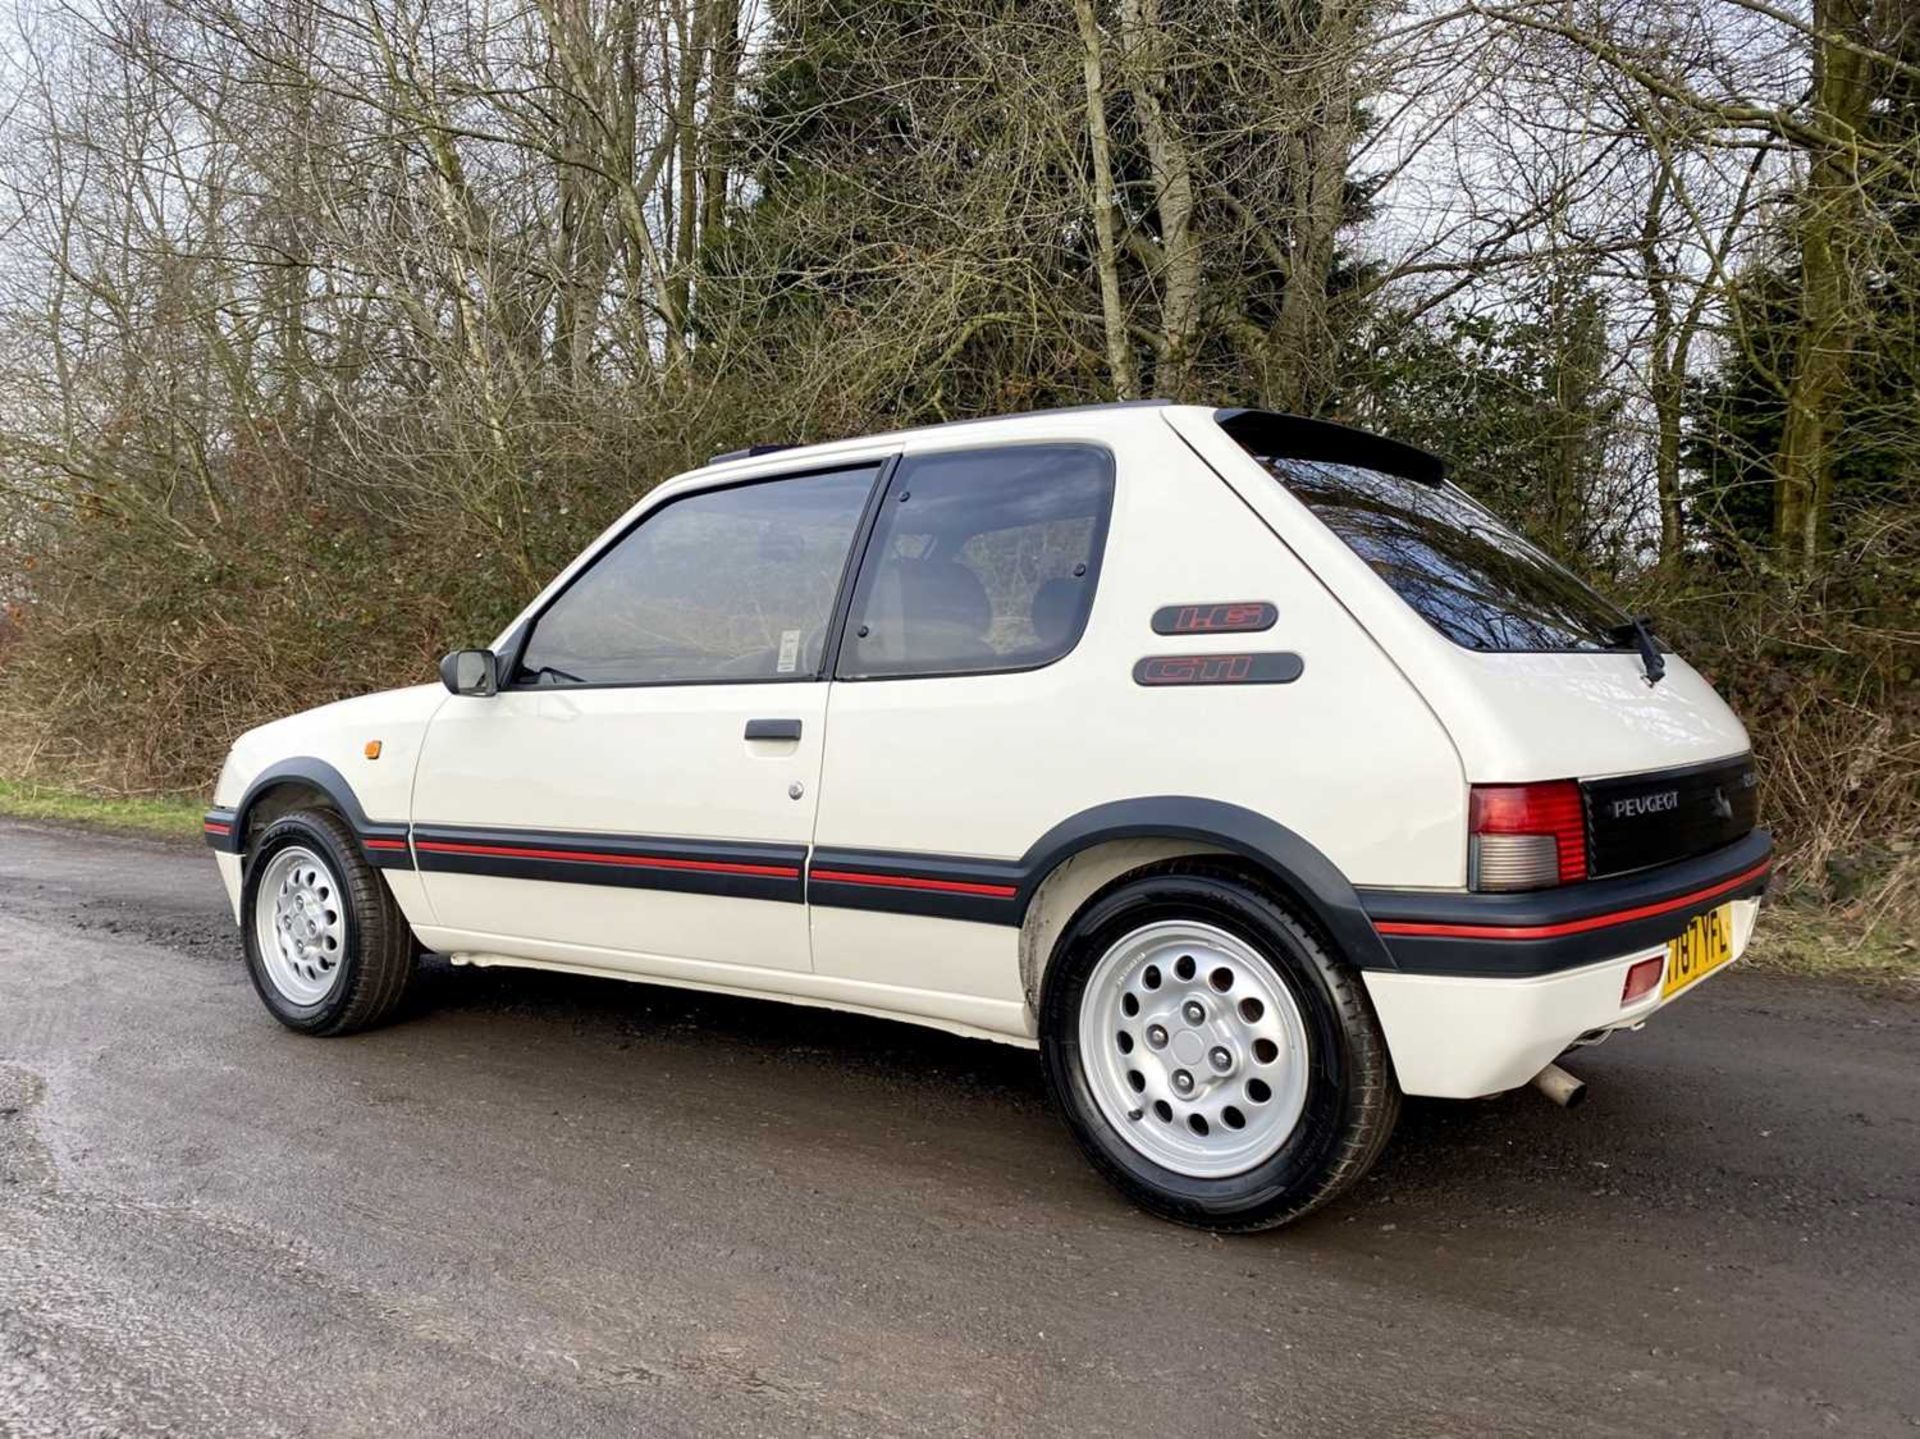 1990 Peugeot 205 GTi 1.6 Only 56,000 miles, same owner for 16 years - Image 22 of 81